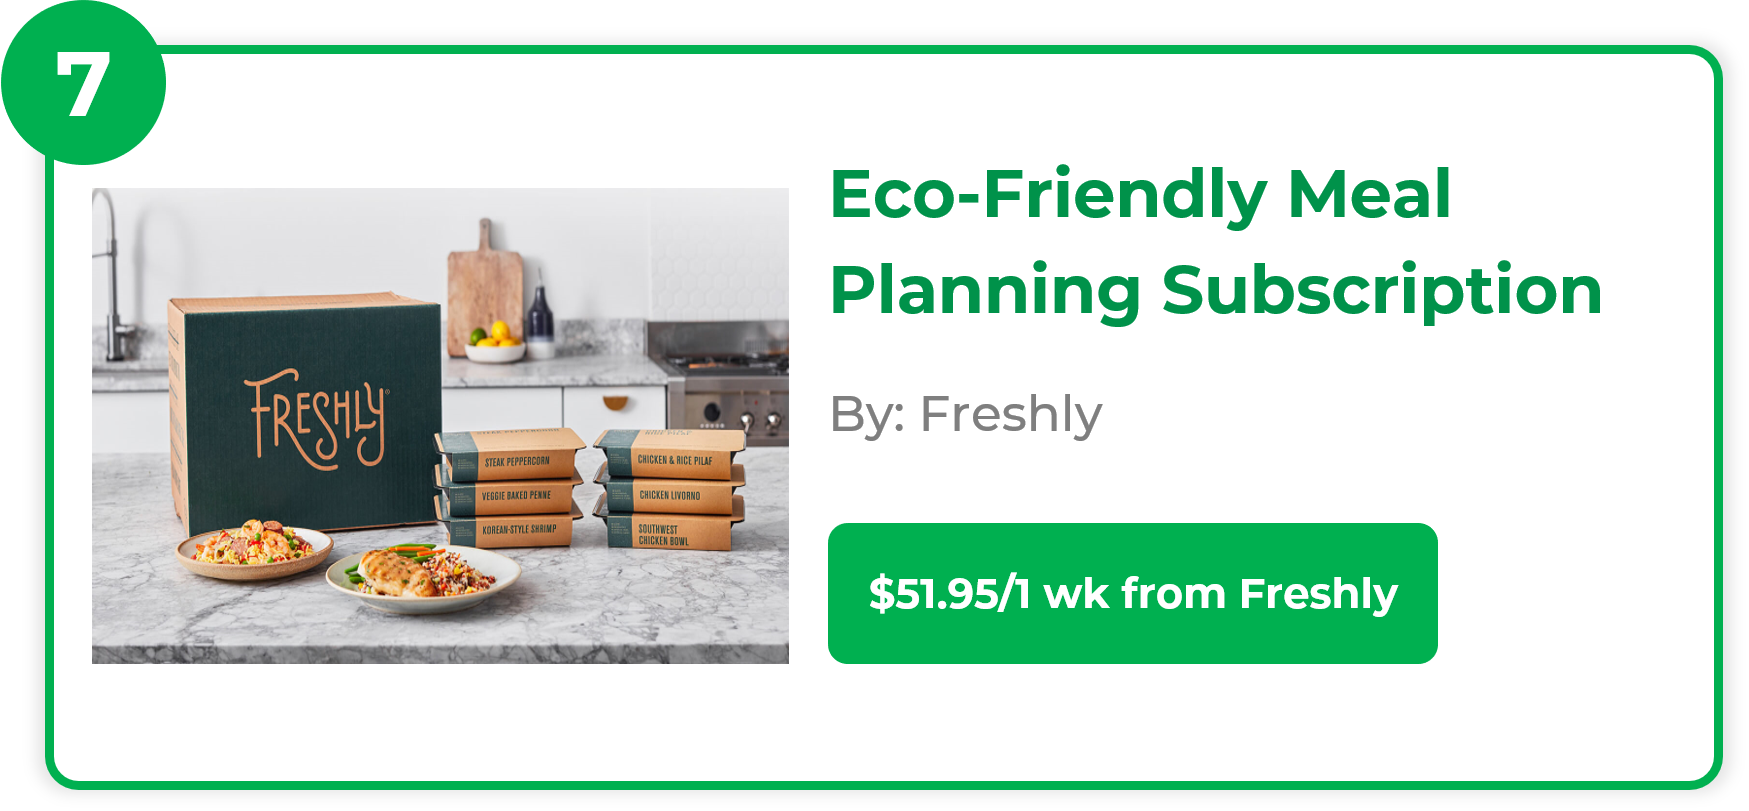 Eco-Friendly Meal Planning Kit Subscription - Freshly